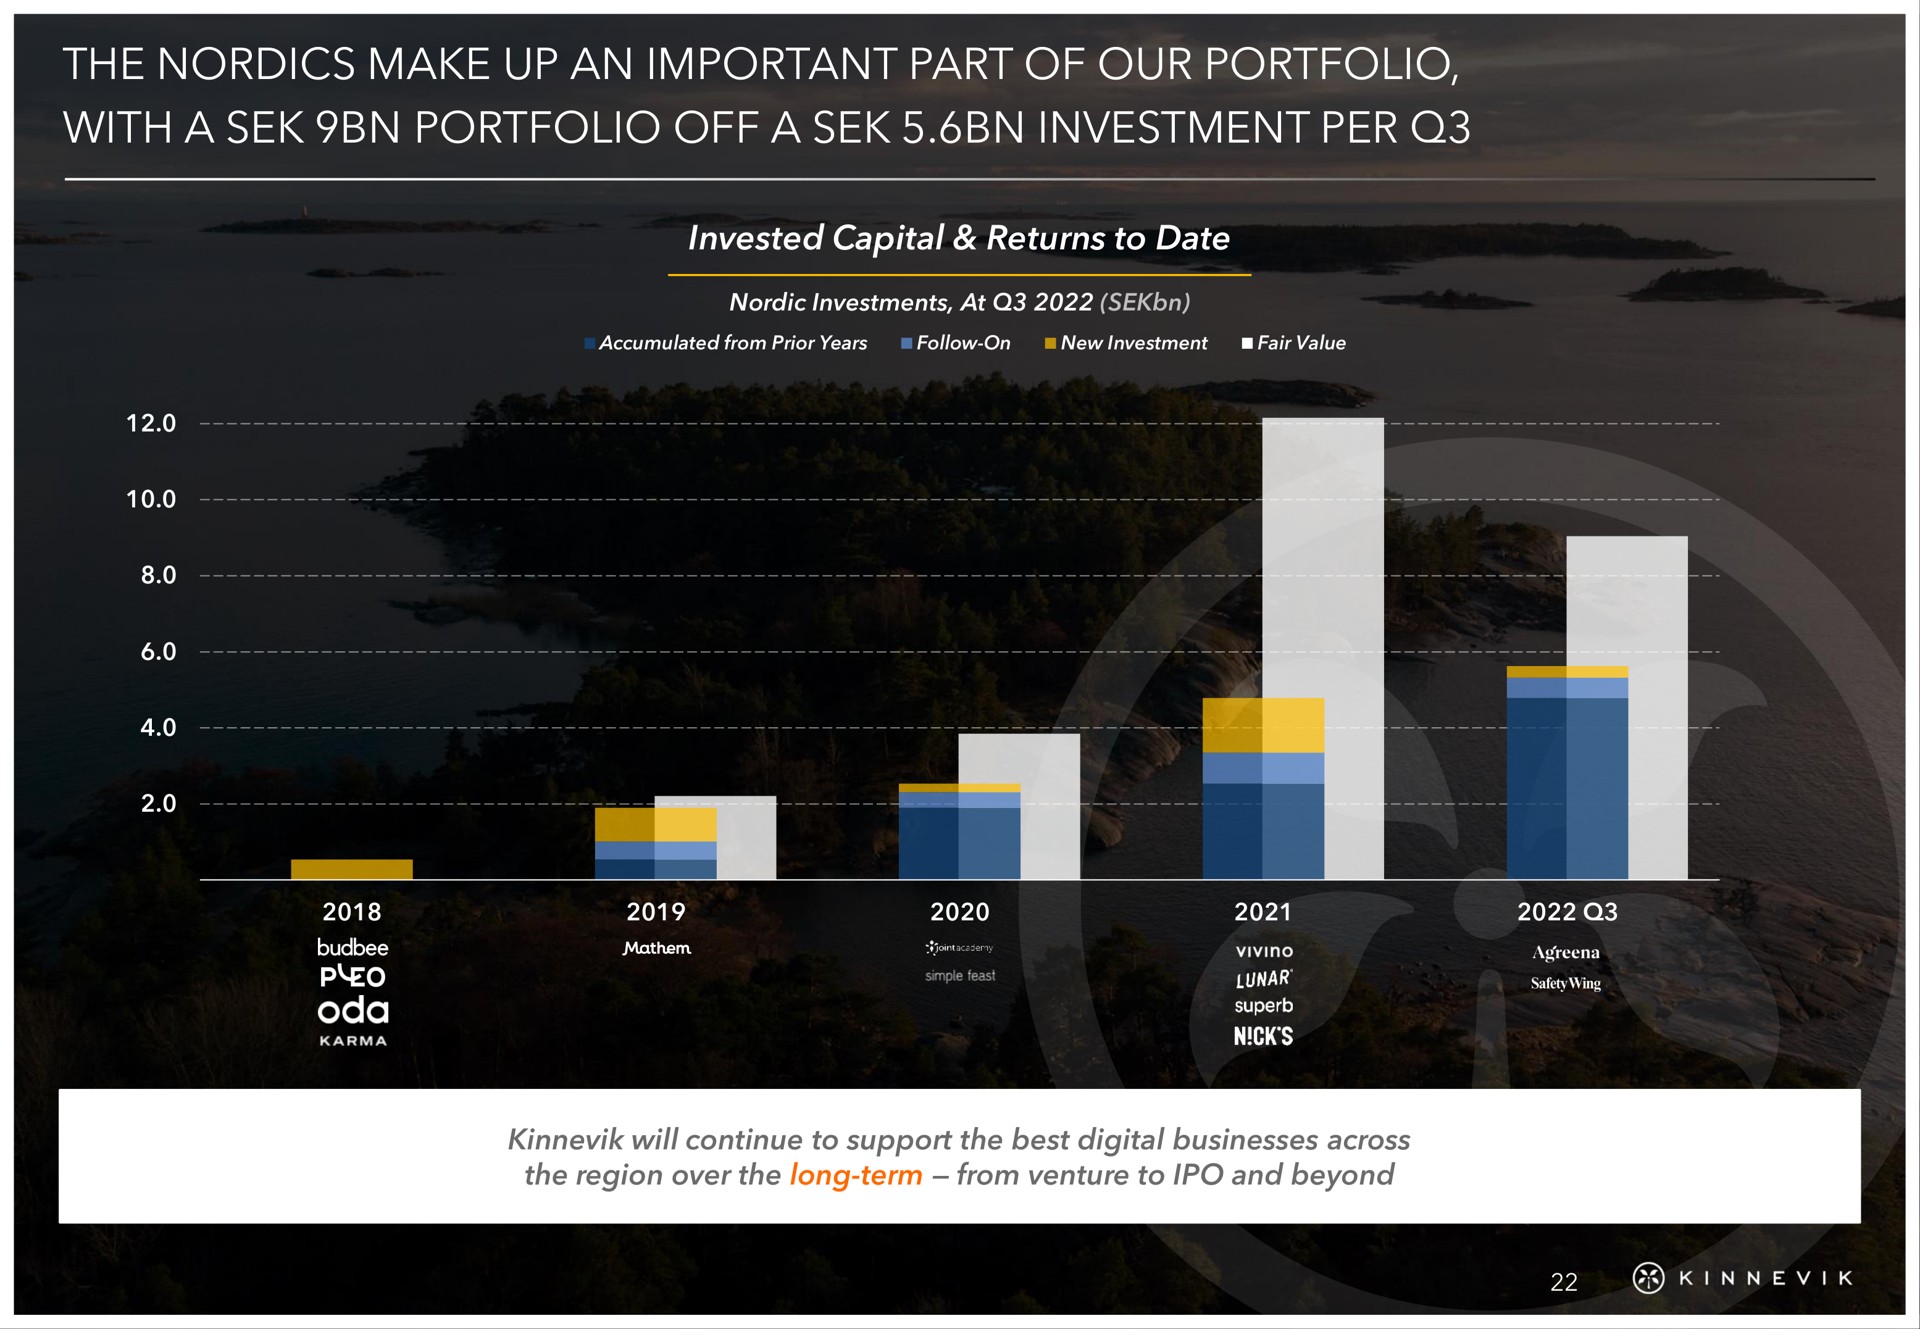 the make up an important part of our portfolio with a portfolio off a investment per | Kinnevik